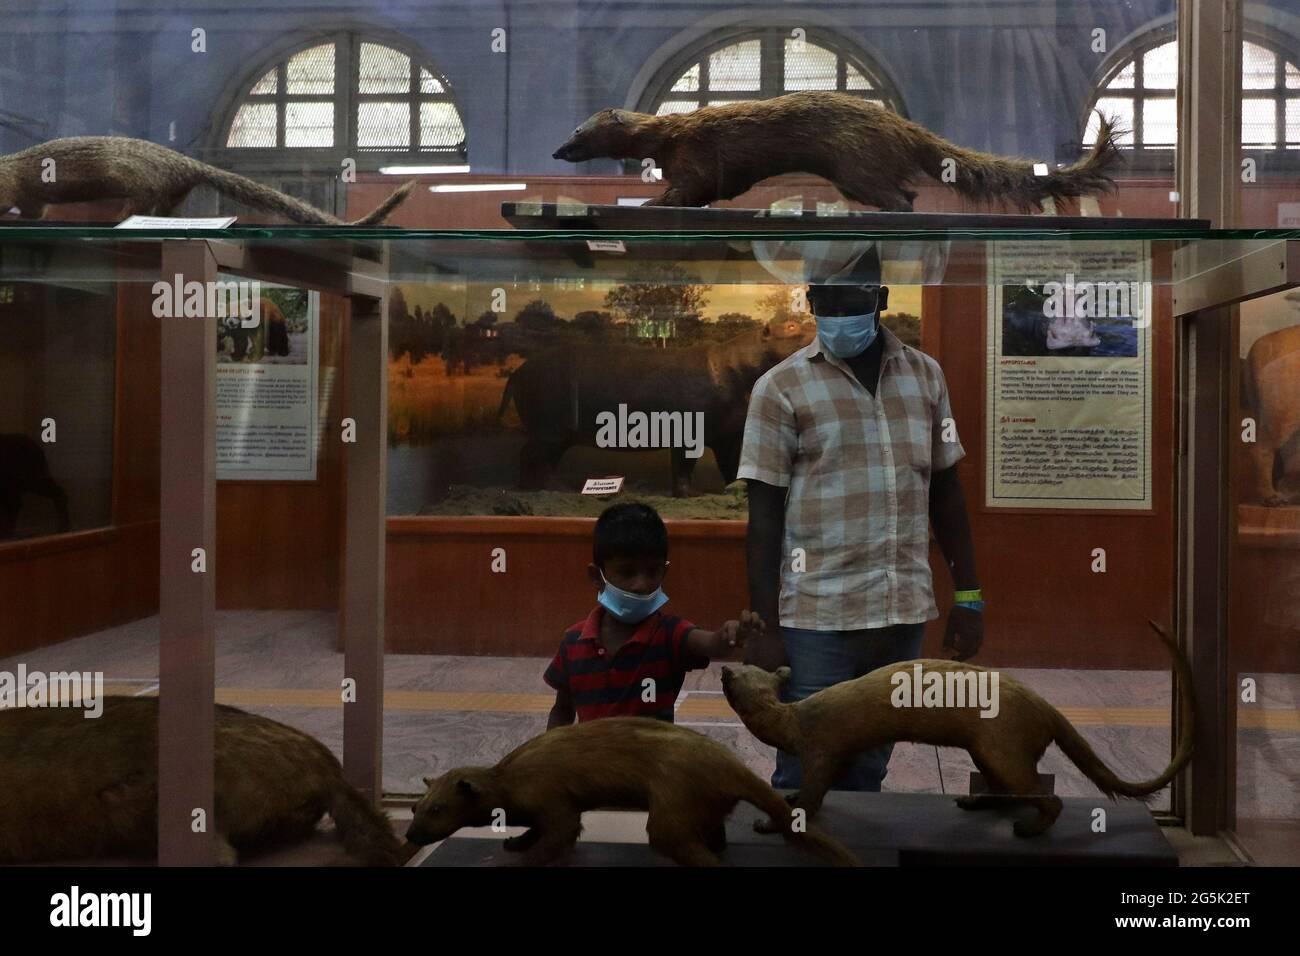 Chennai, Tamil Nadu, India. 28th June, 2021. Visitors look at a Whale's skeletal system displayed at the Egmore Government museum after the state authorities relaxed the lockdown norms following a marginal drop in Covid-19 coronavirus cases in Chennai. Credit: Sri Loganathan/ZUMA Wire/Alamy Live News Stock Photo